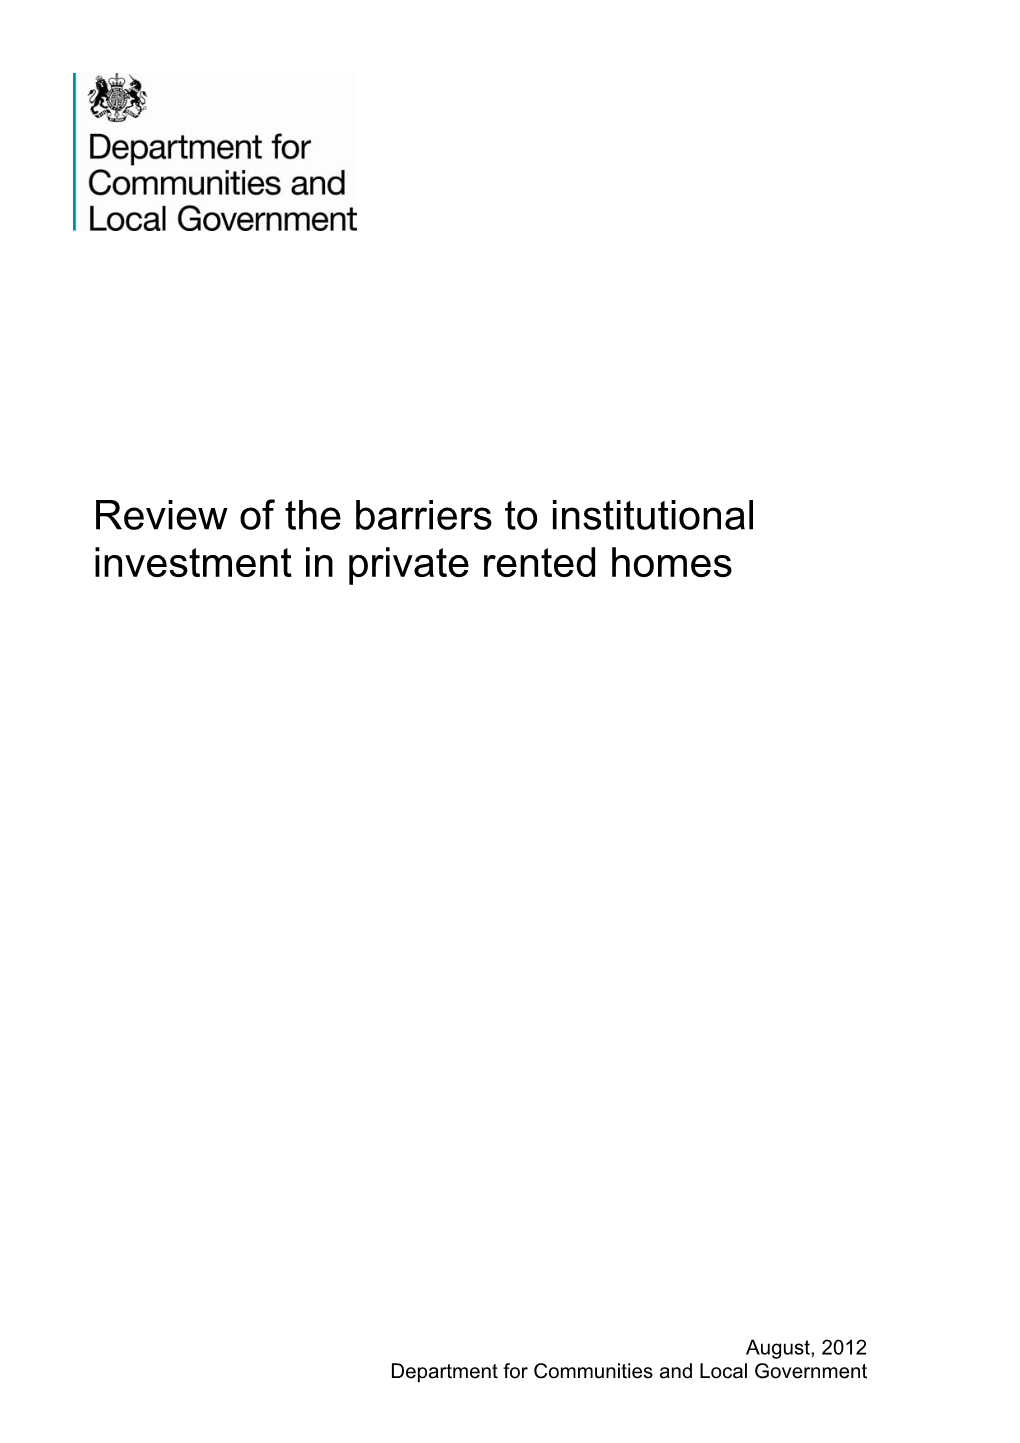 Review of the Barriers to Institutional Investment in Private Rented Homes